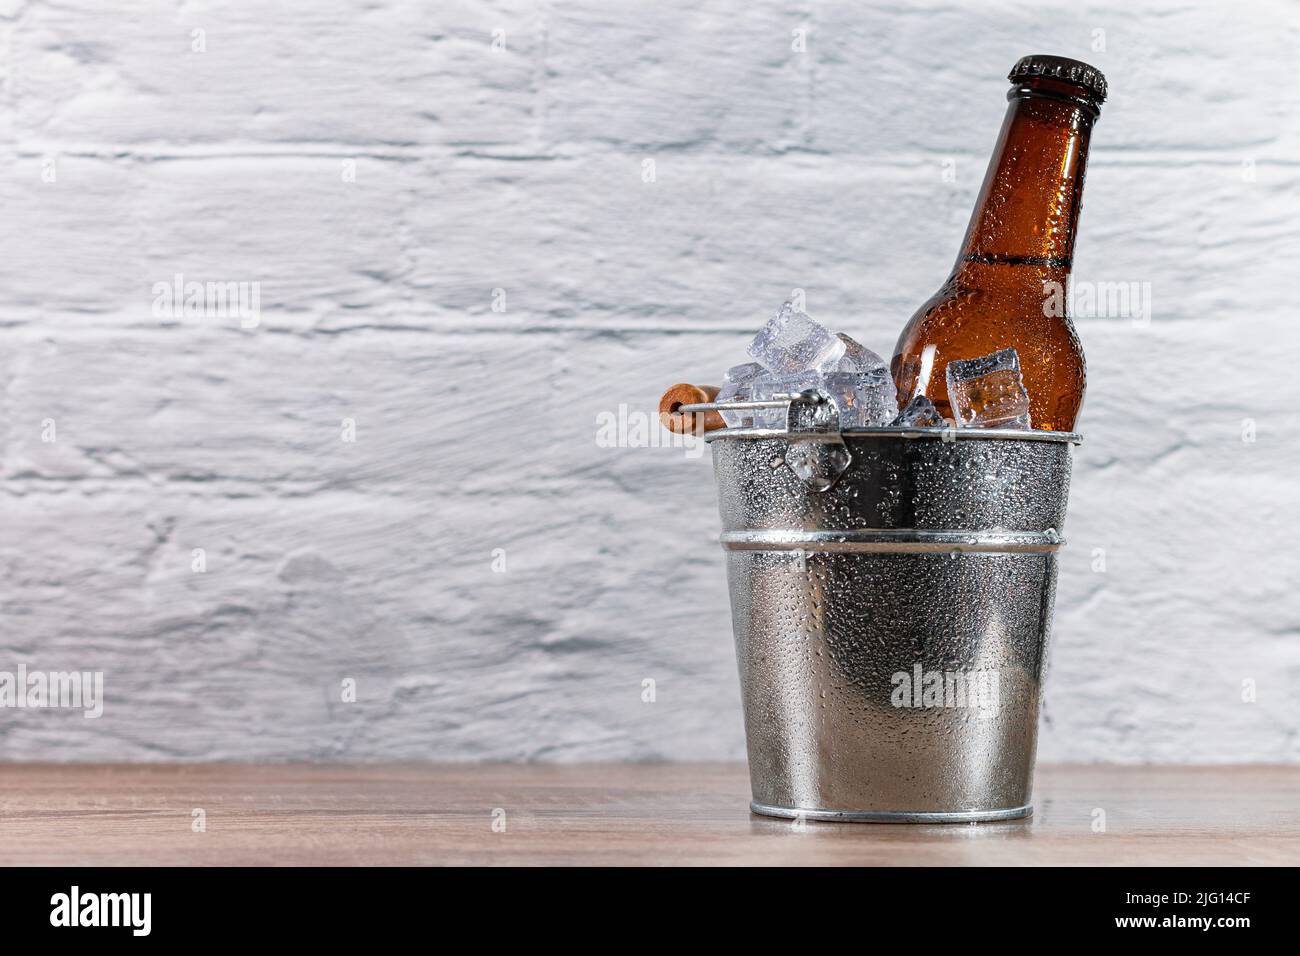 https://c8.alamy.com/comp/2JG14CF/ice-filled-metal-bucket-with-a-fresh-bottle-of-beer-capped-with-condensation-drops-on-a-wooden-table-in-front-of-a-white-wall-2JG14CF.jpg